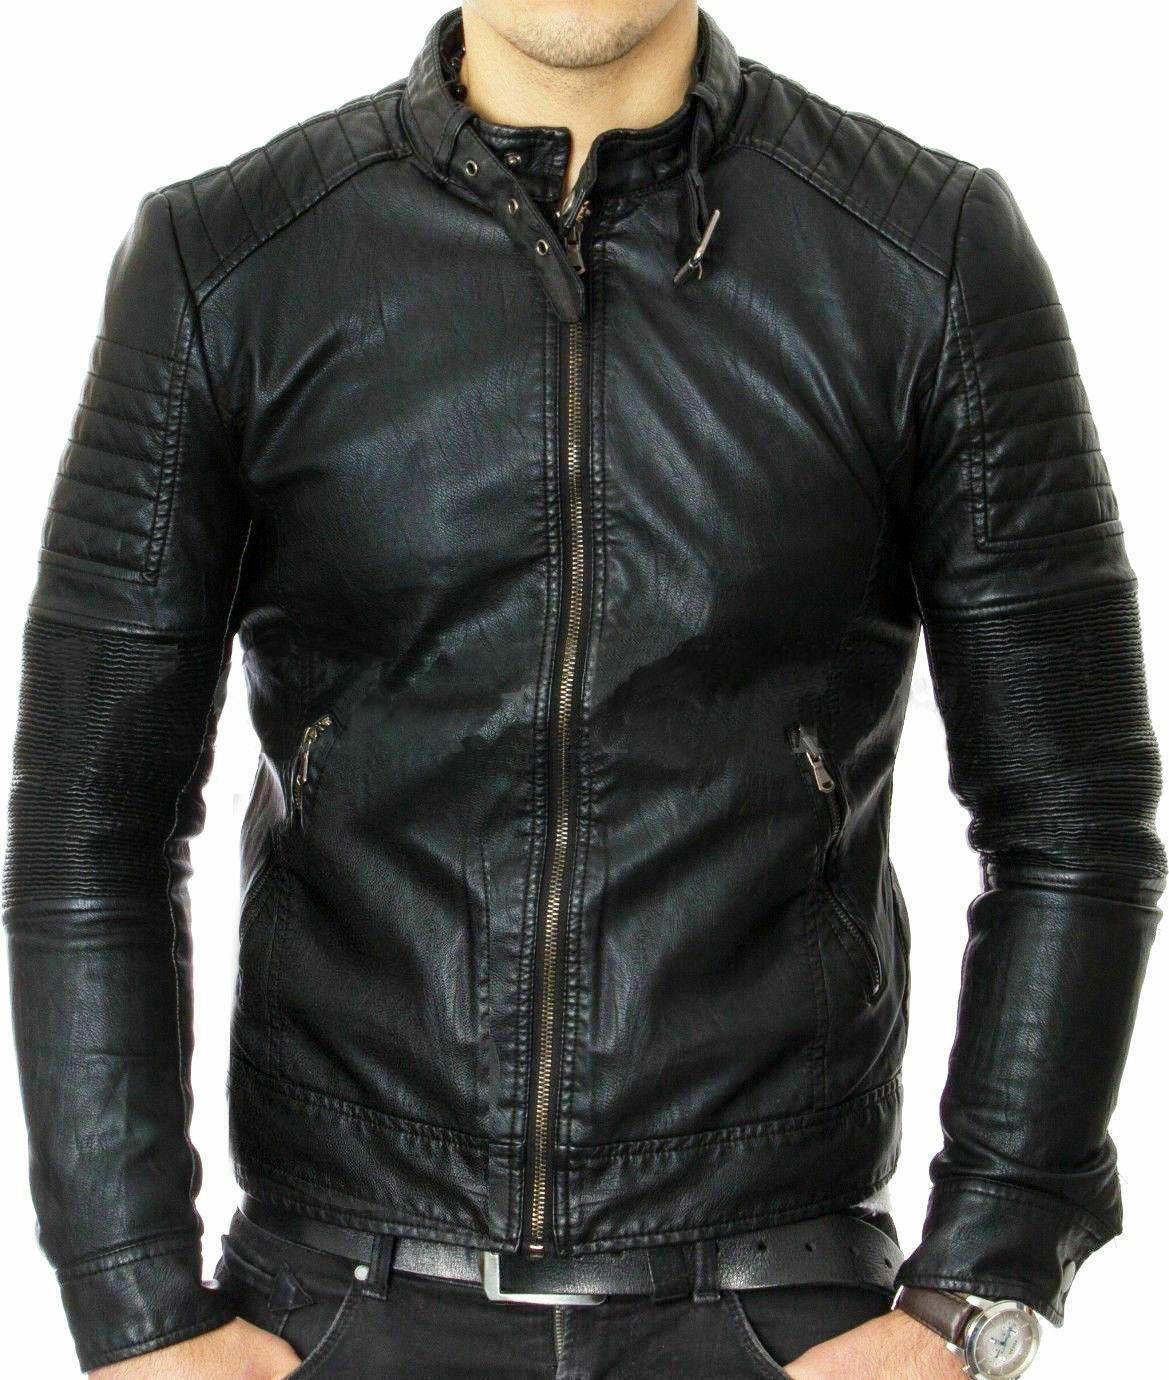 NOORA NEW MENS REAL LAMBSKIN LEATHER BLAZER JACKET TWO BUTTON SLIM FIT COAT NI-5